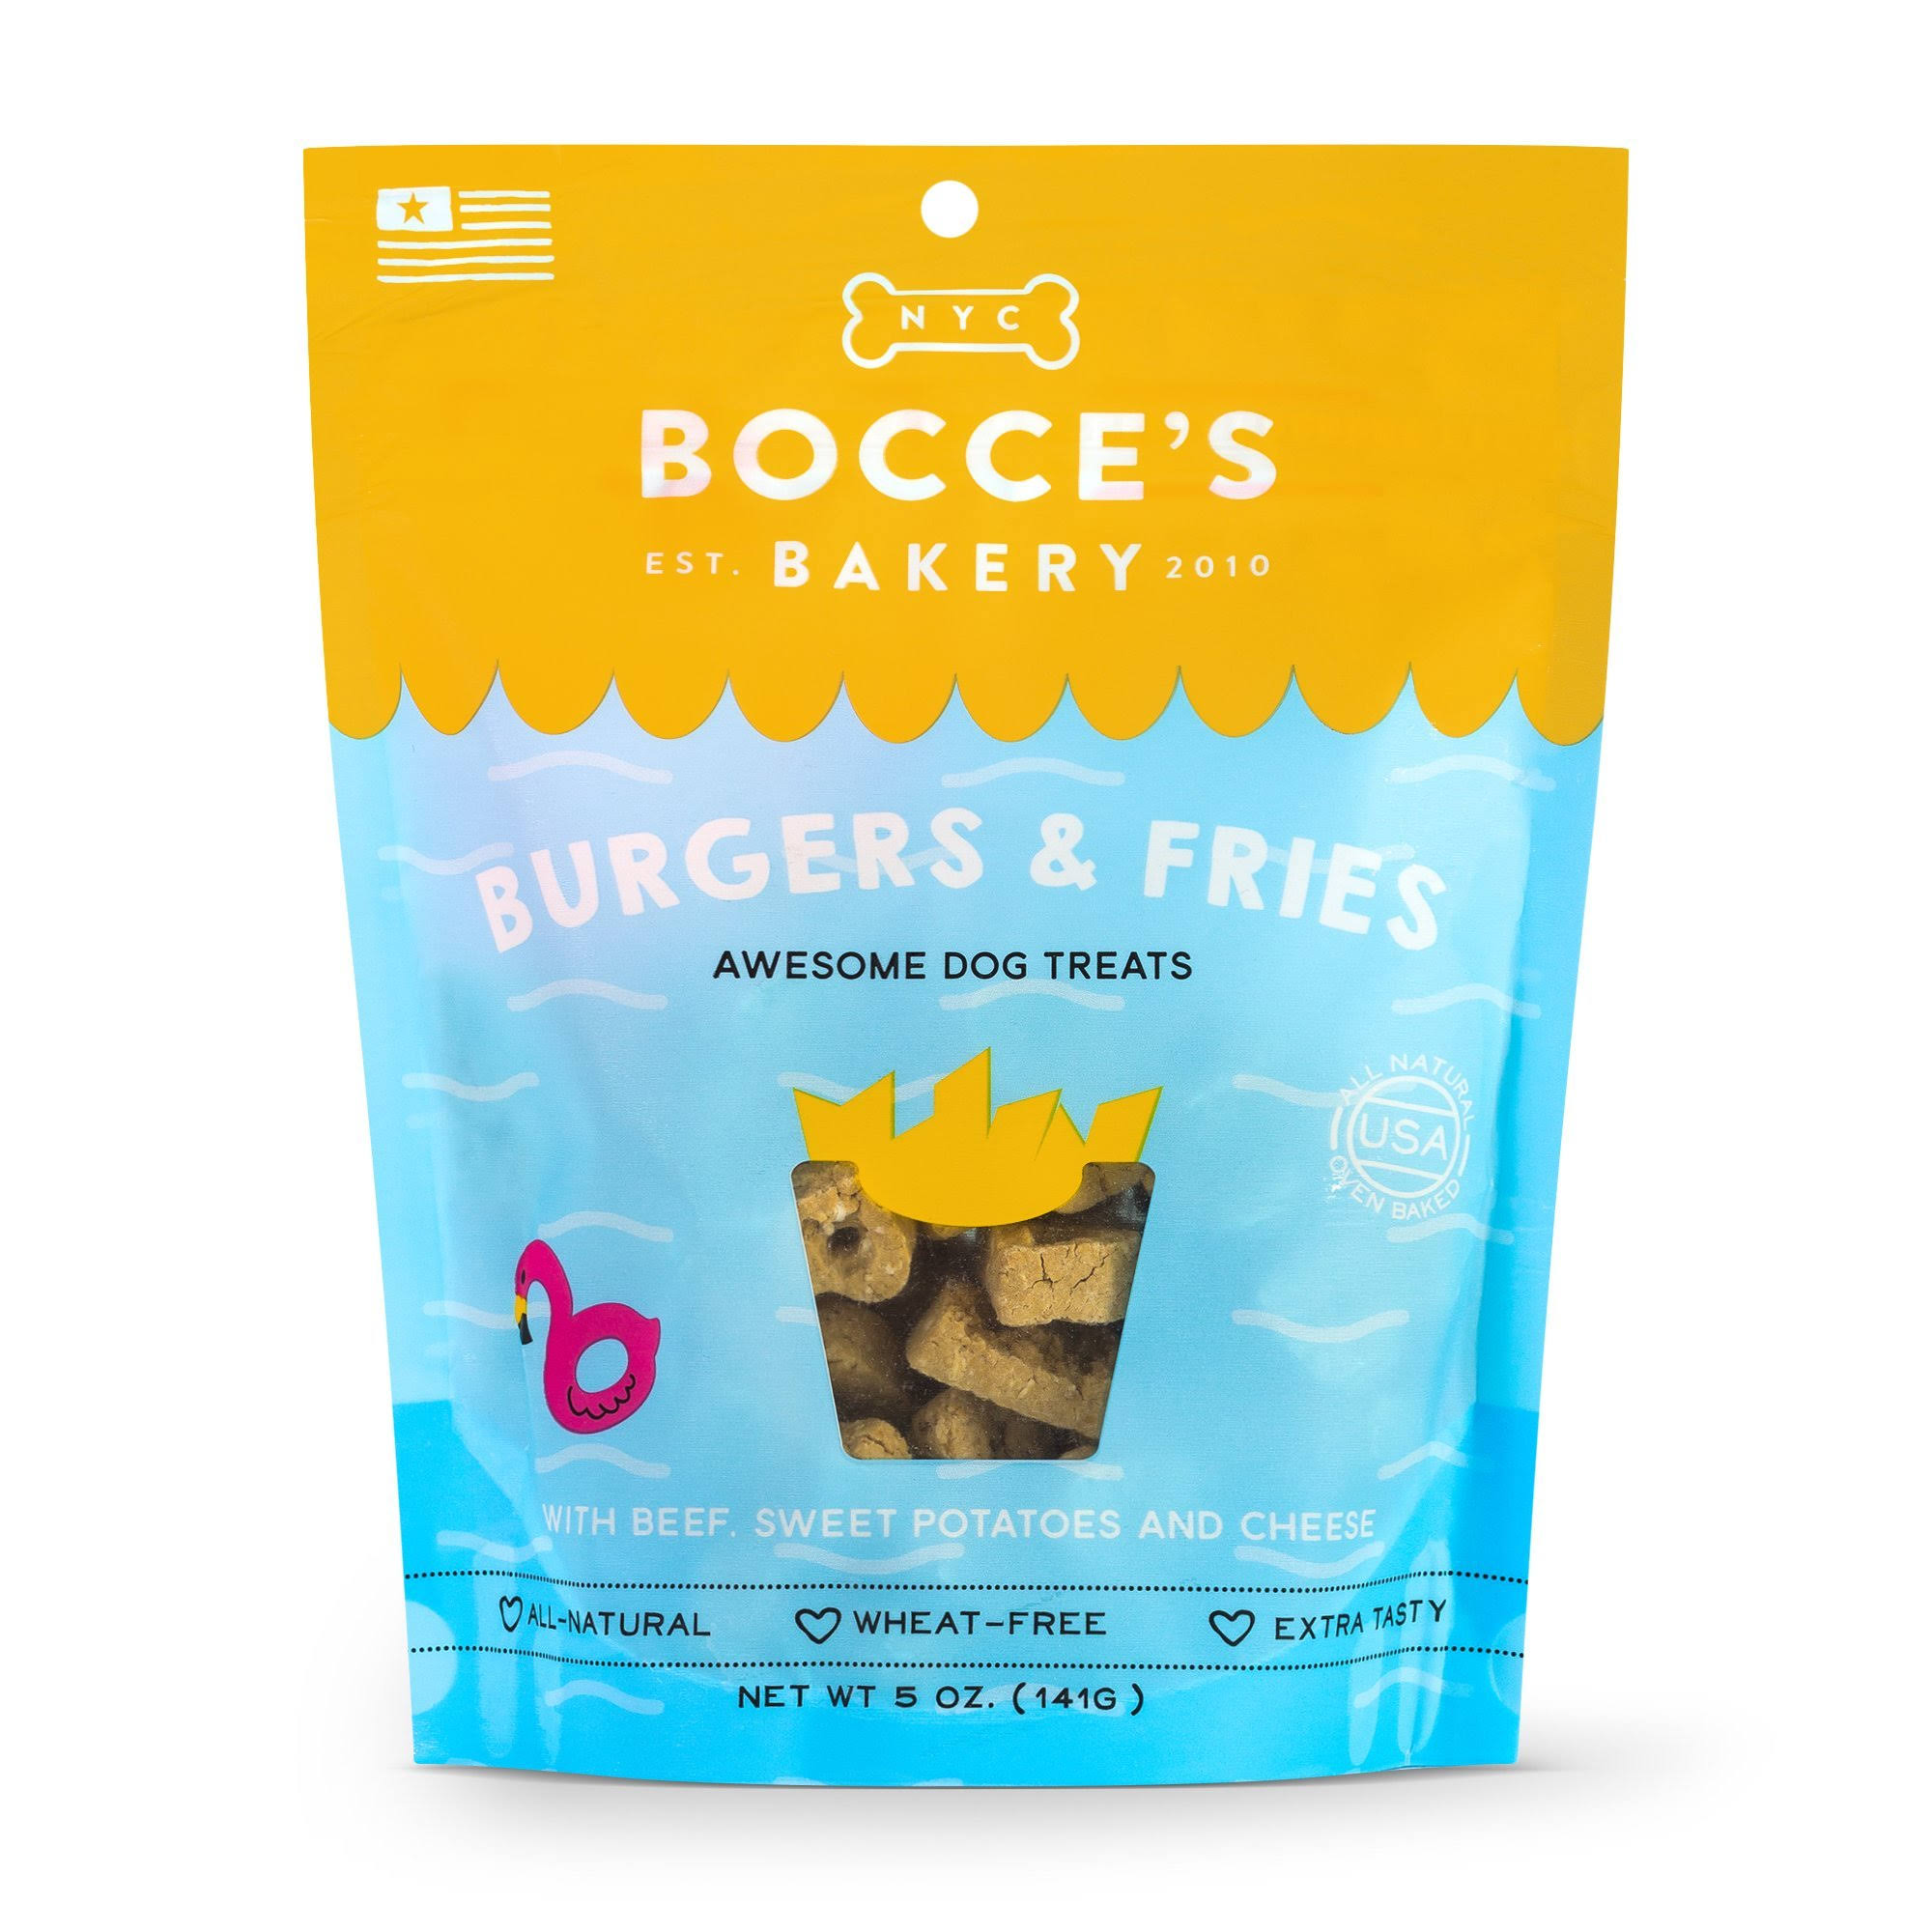 Bocces Bakery Burgers Fries Biscuits Dog Treats, 5 oz